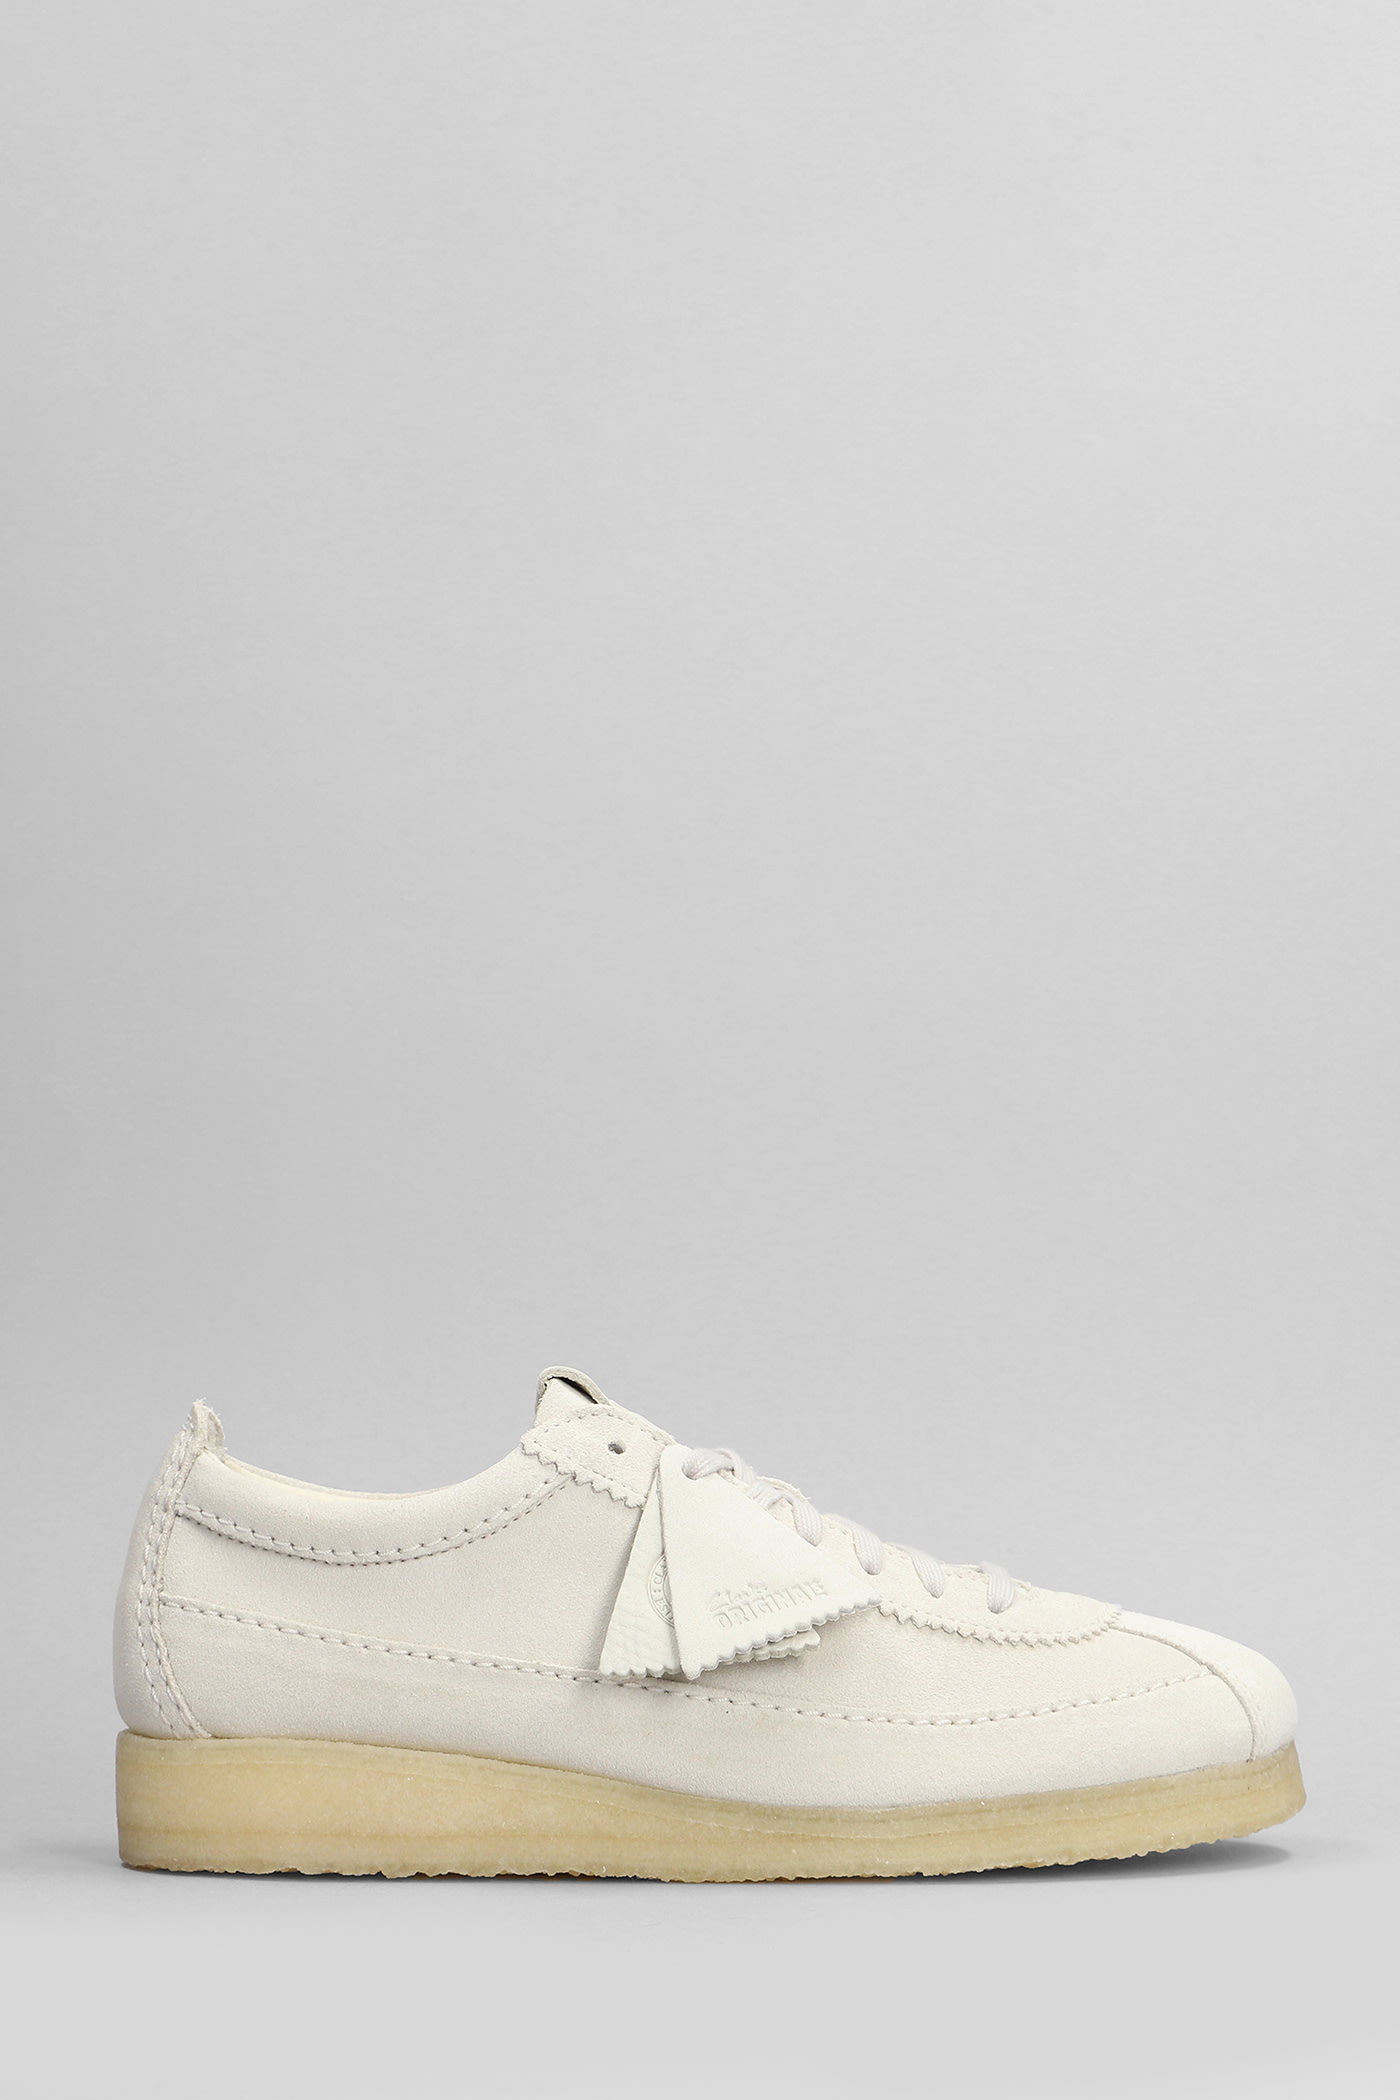 Clarks Wallabee Tor Lace Up Shoes In White Suede